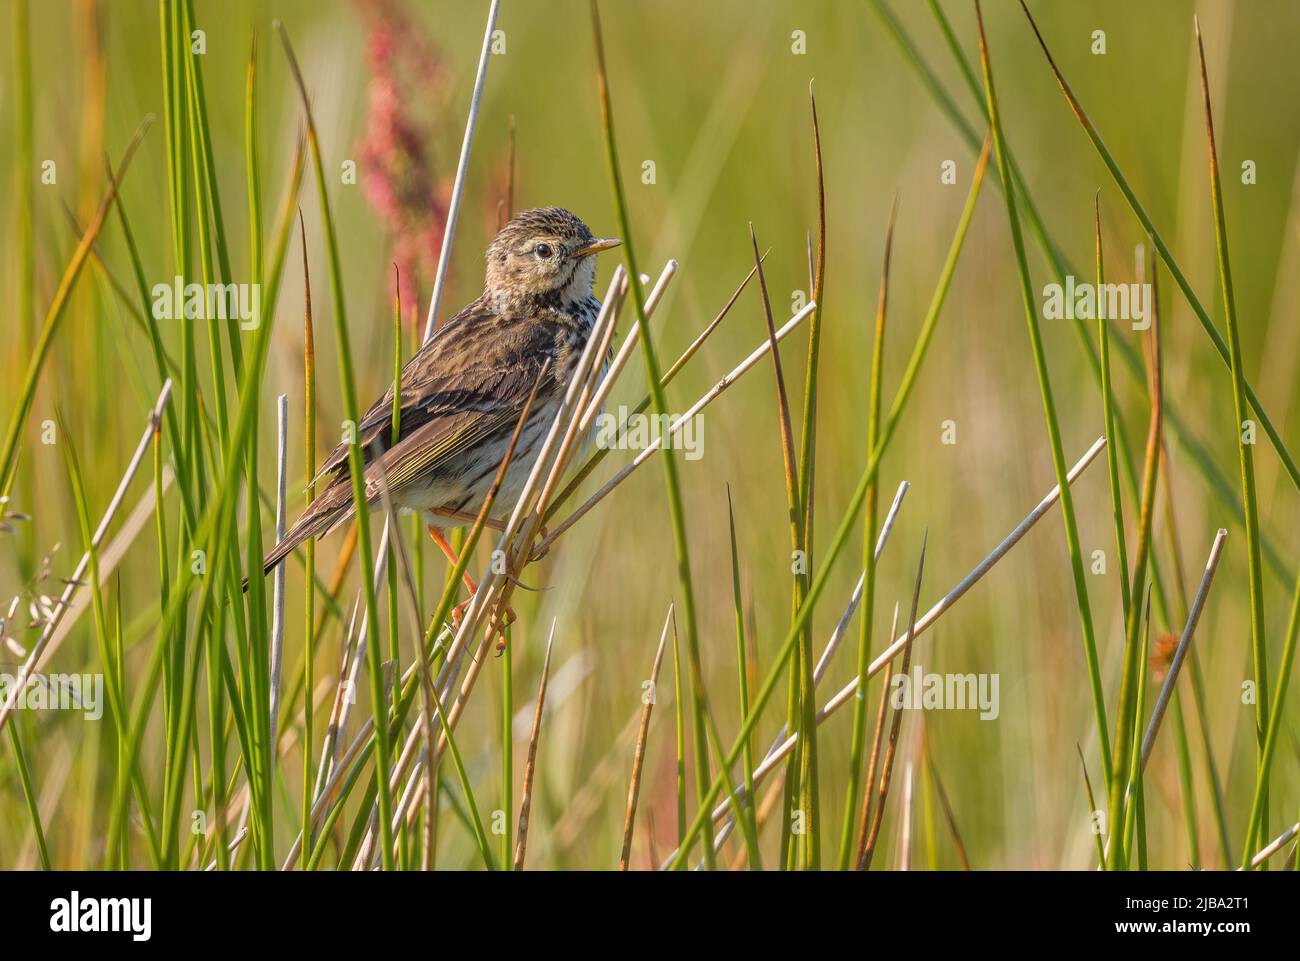 Meadow Pipit - Anthus pratensis, small brown perching bird from European meadows and grasslands, Runde island, Norway. Stock Photo